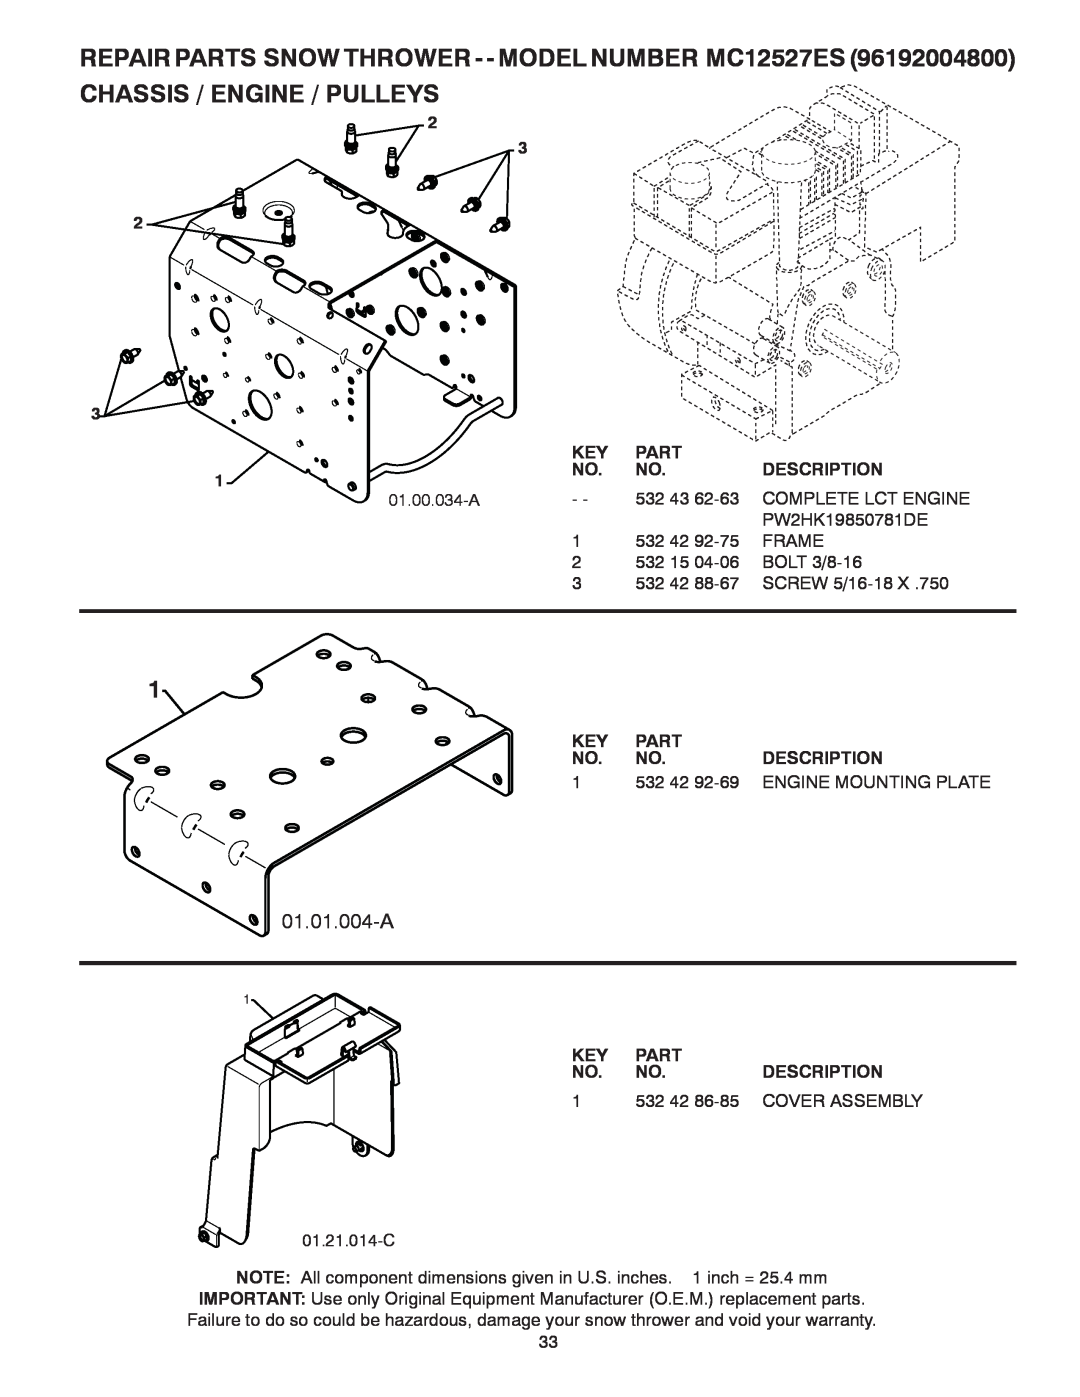 McCulloch MC12527ES Chassis / Engine / Pulleys, 01.01.004-A, Part, Description, 532 42 92-69ENGINE MOUNTING PLATE 